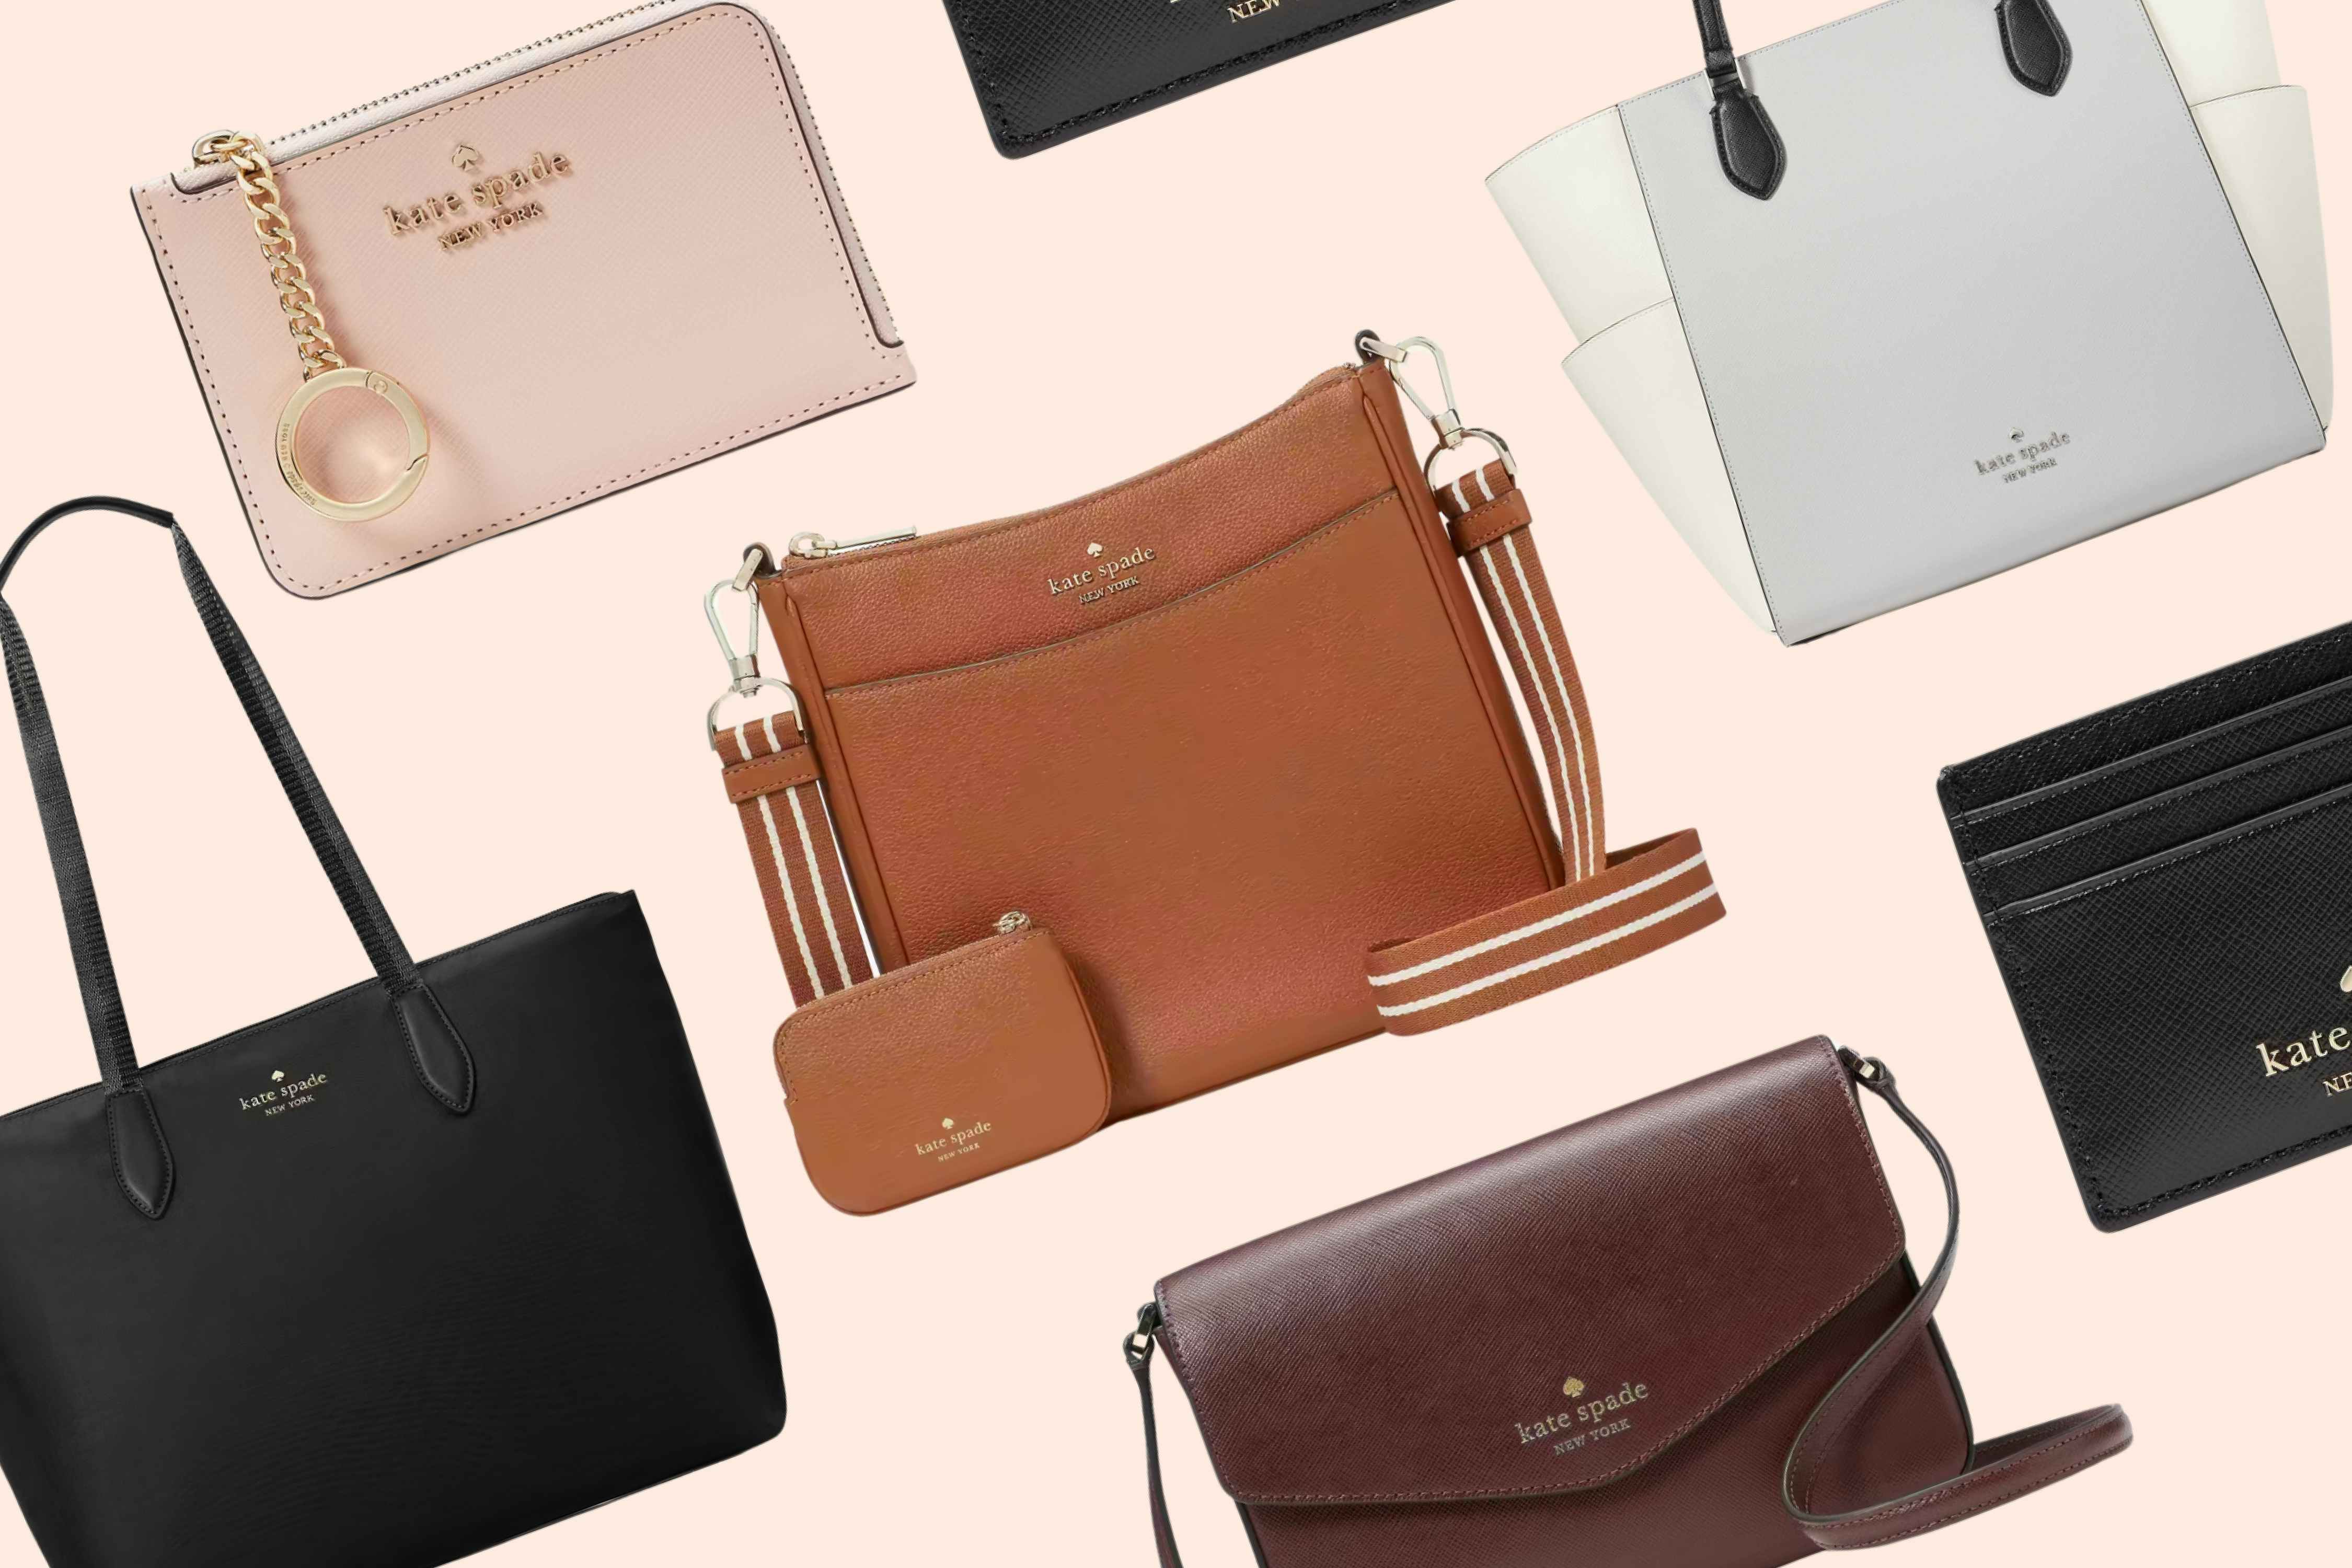 Kate Spade Sale on 180+ Styles: $75 Leather Bag, $55 Wallet — Last Day